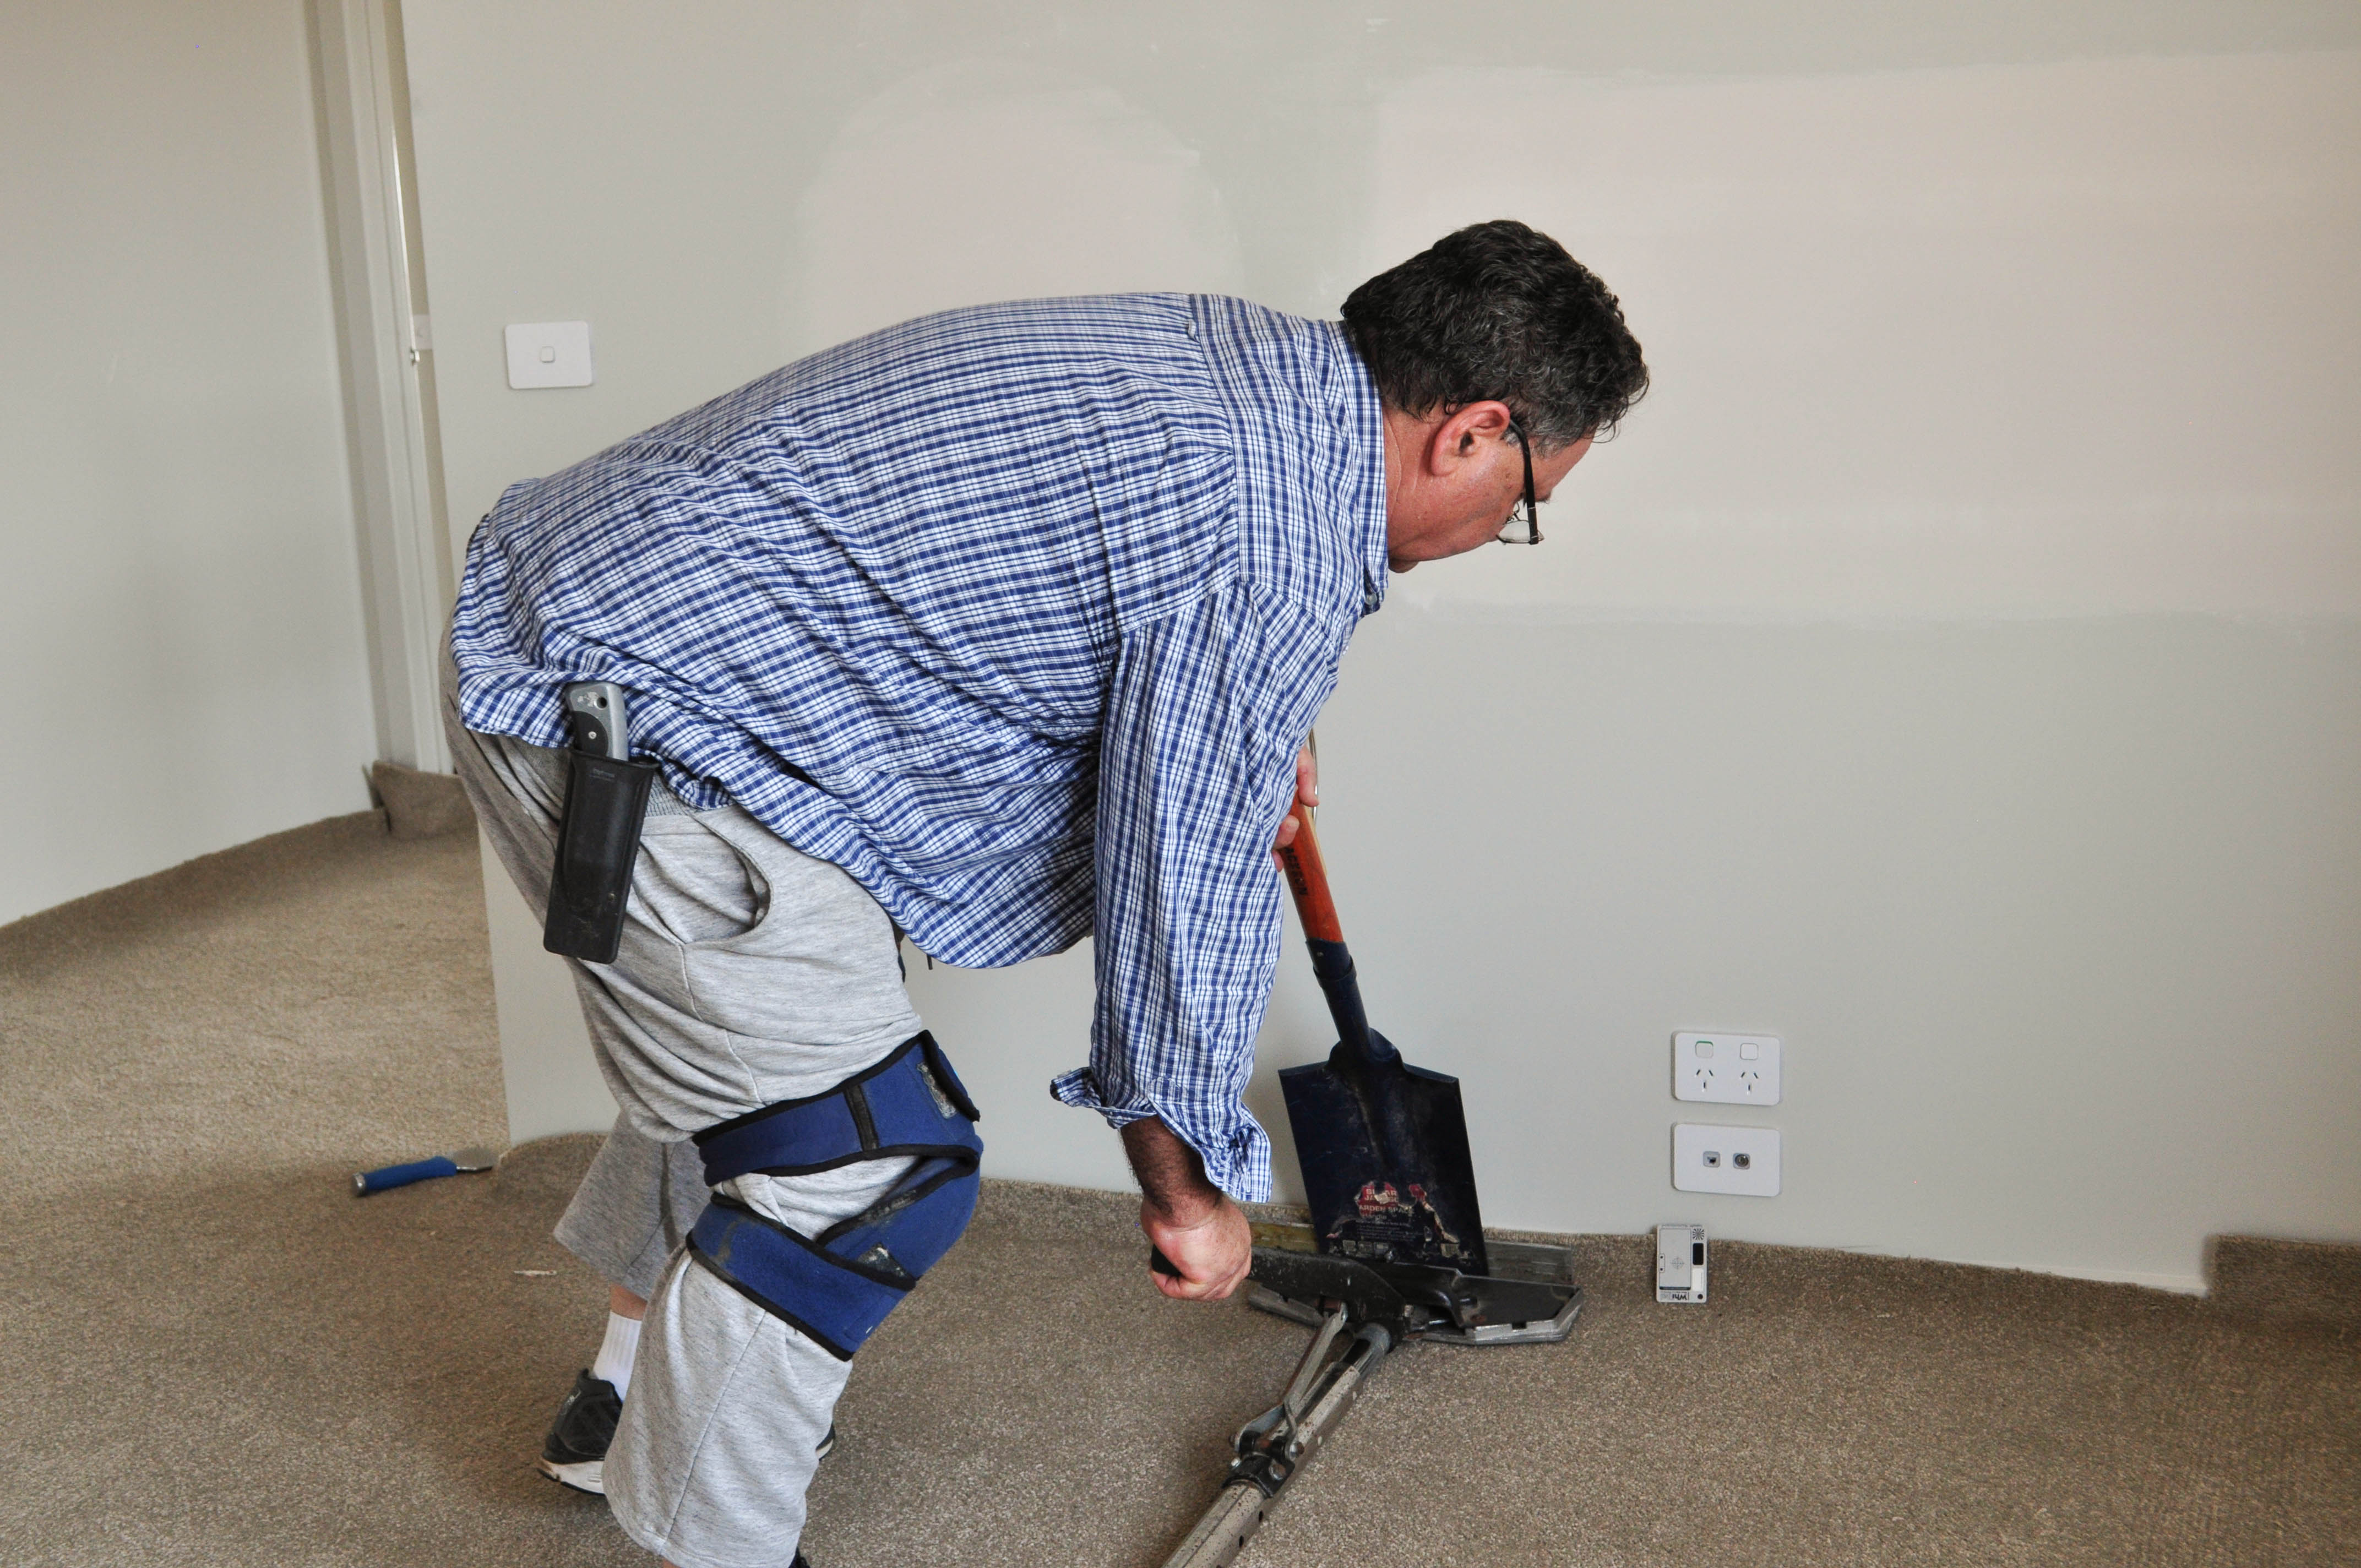 a slab of carpet with ripples in it, in a room that has been lifted of the gripper and where the telescopic head of the power stretcher
has been applied against the carpet gripping it and stretching it. The picture shows a carpet layer using the power stretcher to forcefully stretch the carpet and remove the
ripples.